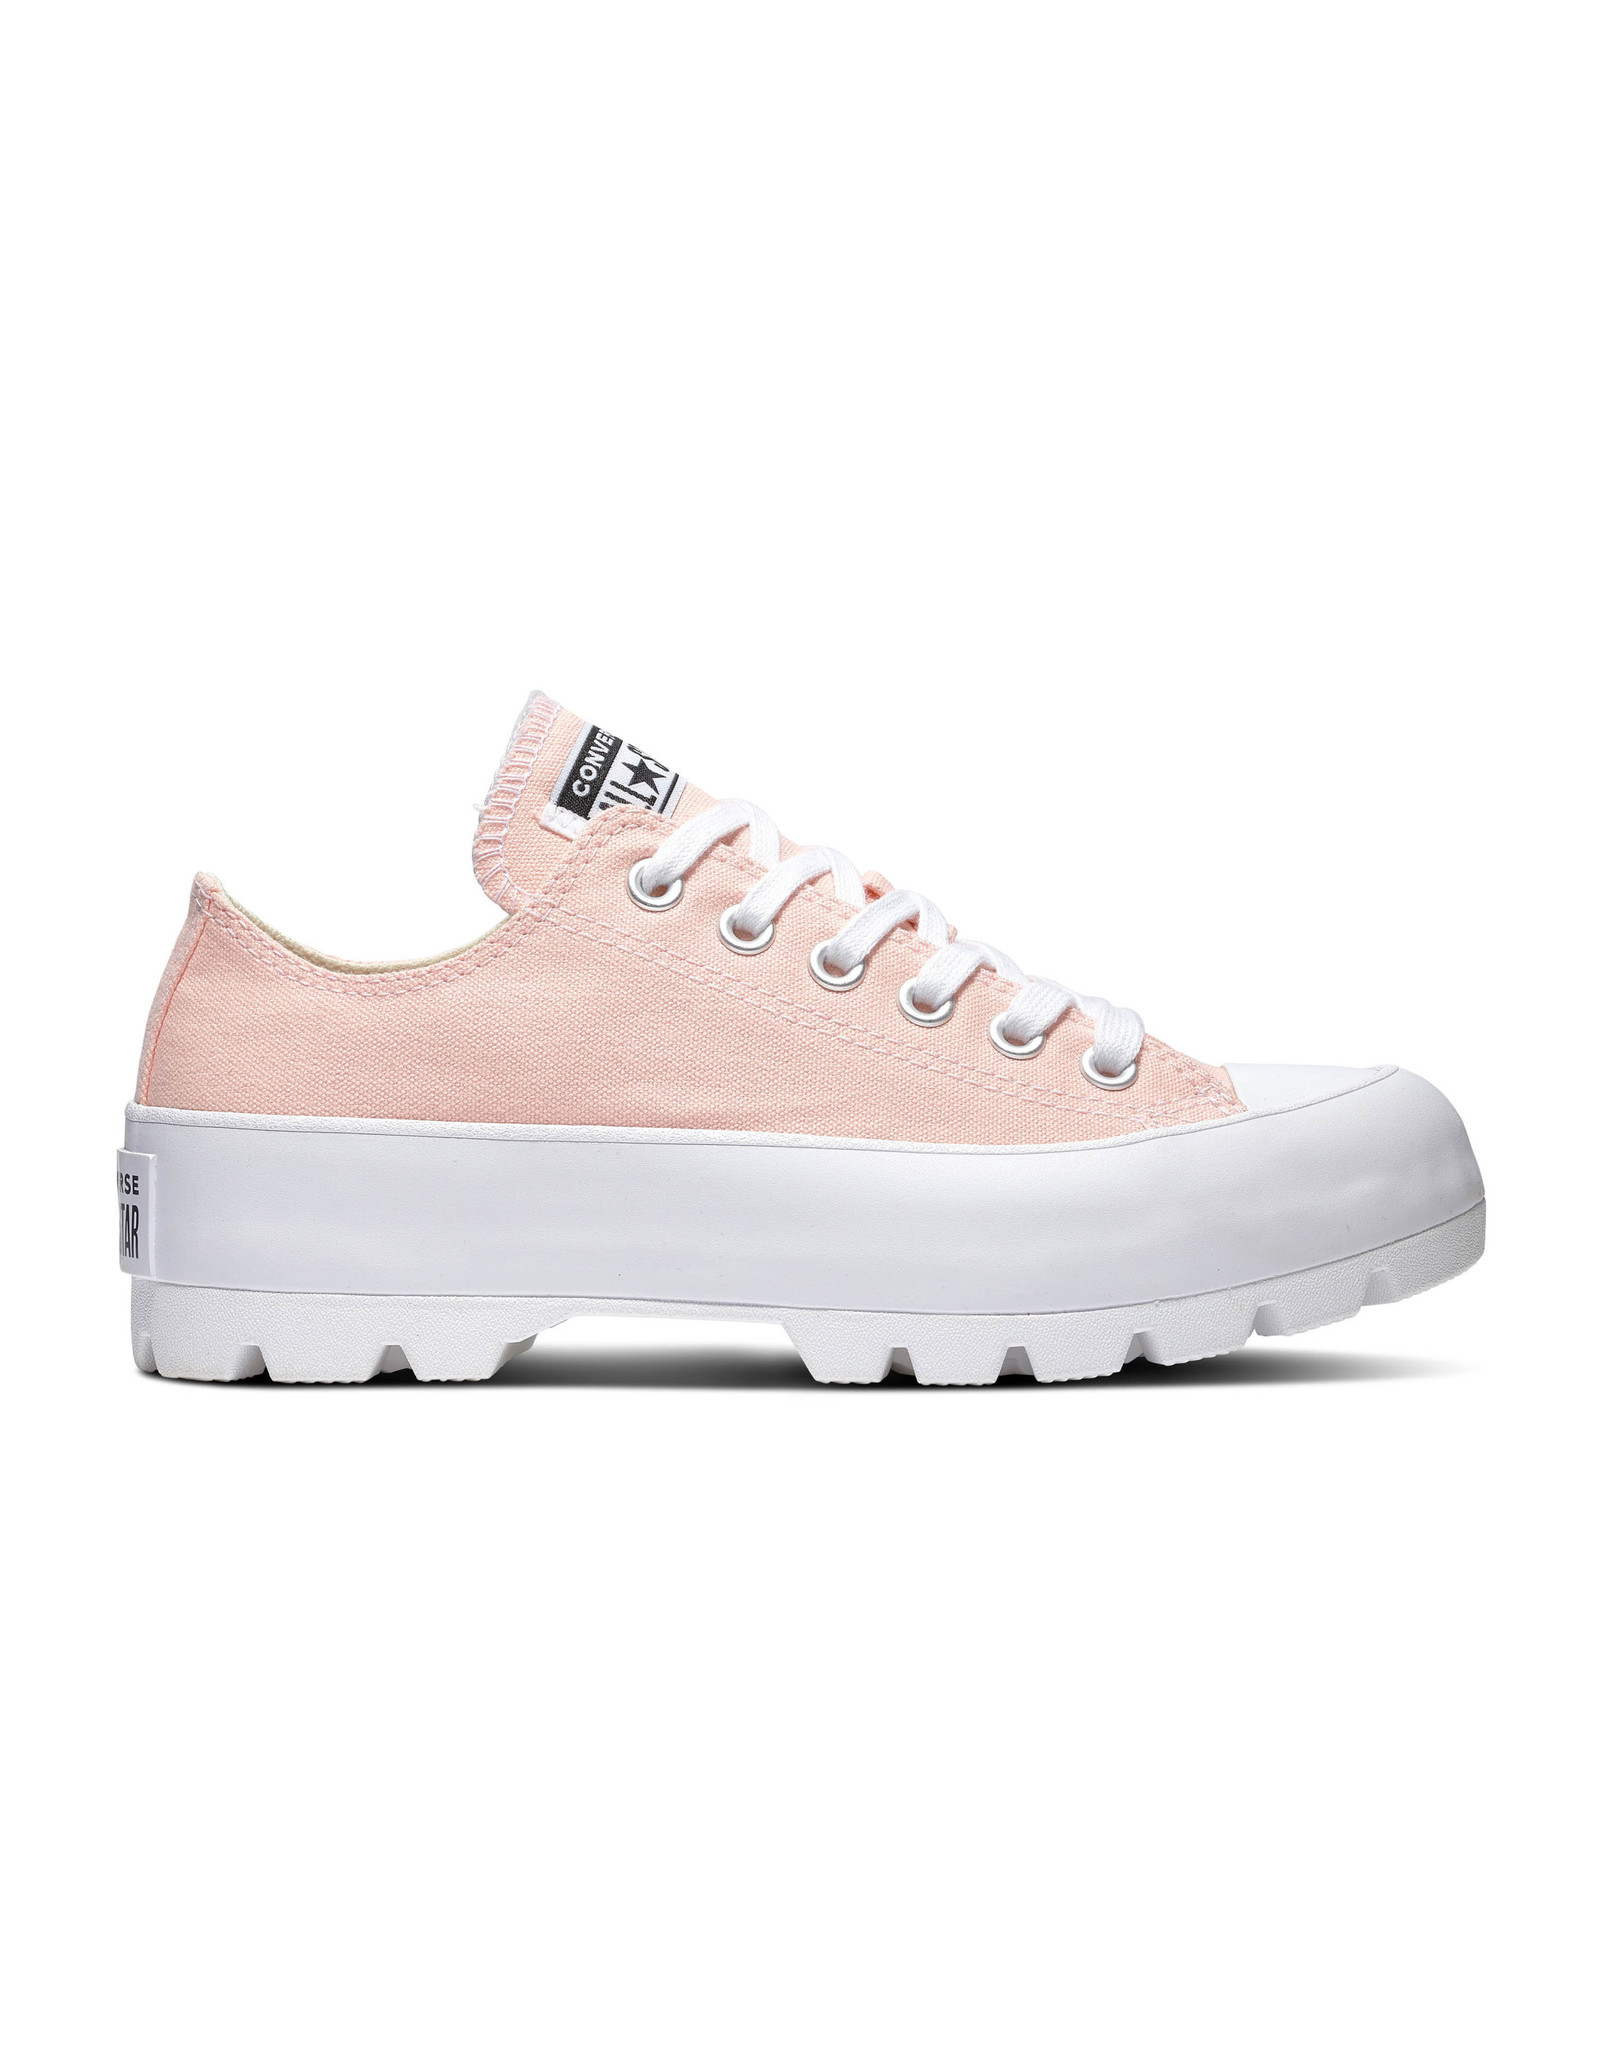 CHUCK TAYLOR LUGGED OX STORM PINK/WHITE/WHITE C094PX-567846C